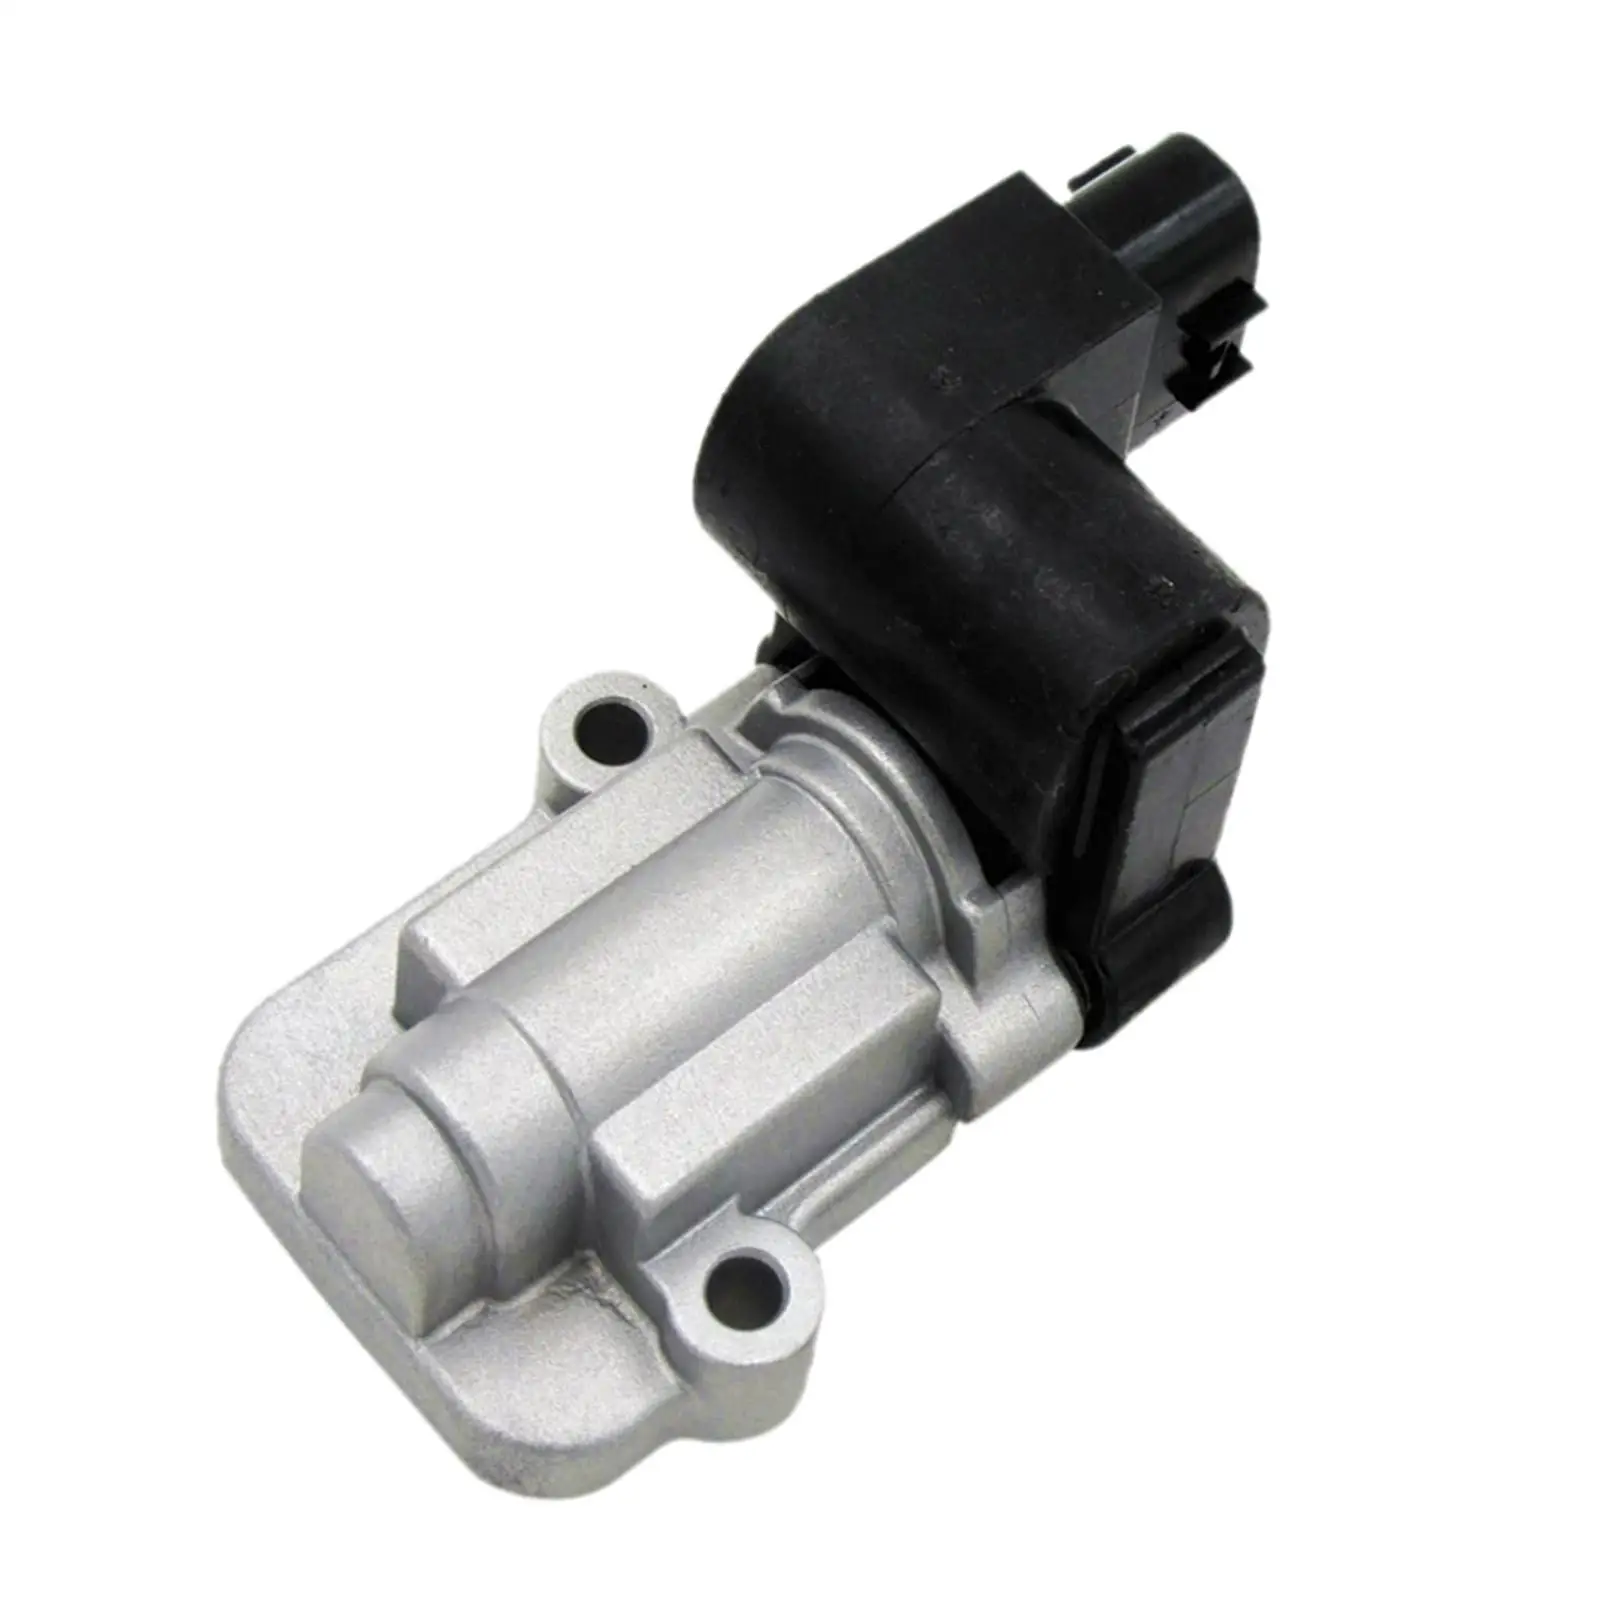 Car Idle  Part No: 22650-AA182, Compatible with     2.0L EJ205 2002